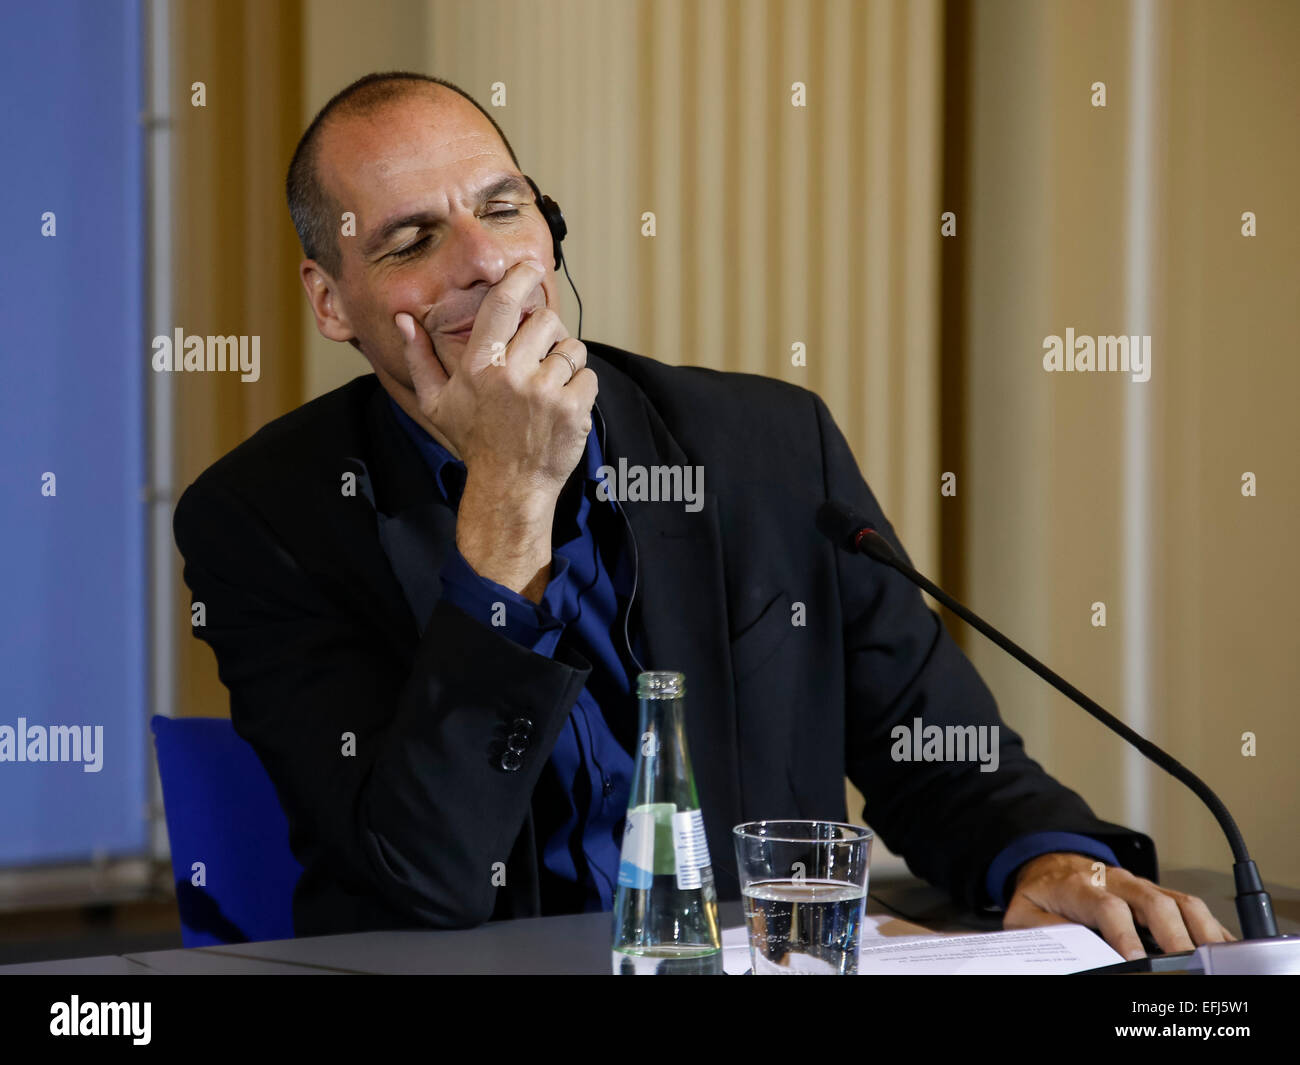 Berlin, Germany. 05th Feb, 2015. Wolfgang Schäuble (CDU), German Minister of Finance, and Yanis Varoufakis, Greek Minister of Finance during press conference after bilateral meeting realized at the German Ministery of Finance  on February 05, 2015 in Berlin, Germany. / Picture: Yanis Varoufakis, Greek Minister of Finance during press conference aside  German Finance Minister Schäuble. © Reynaldo Chaib Paganelli/Alamy Live News Credit:  Reynaldo Chaib Paganelli/Alamy Live News Stock Photo